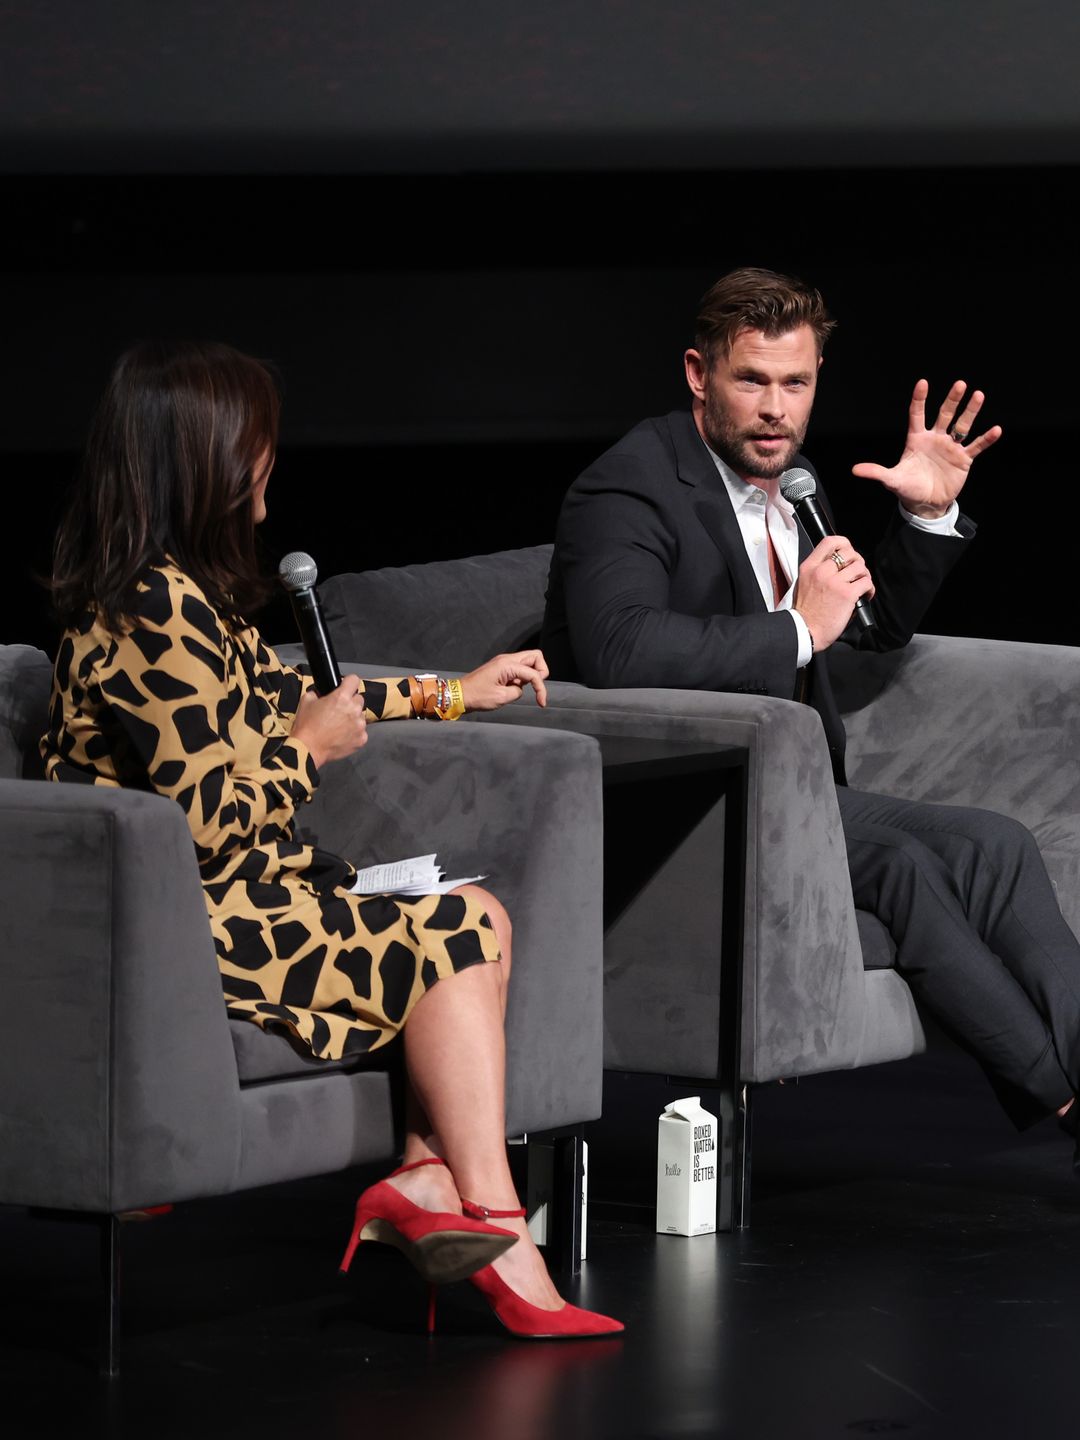 Chris Hemsworth sat on a stage being interviewed by another person, who has her back to the camera